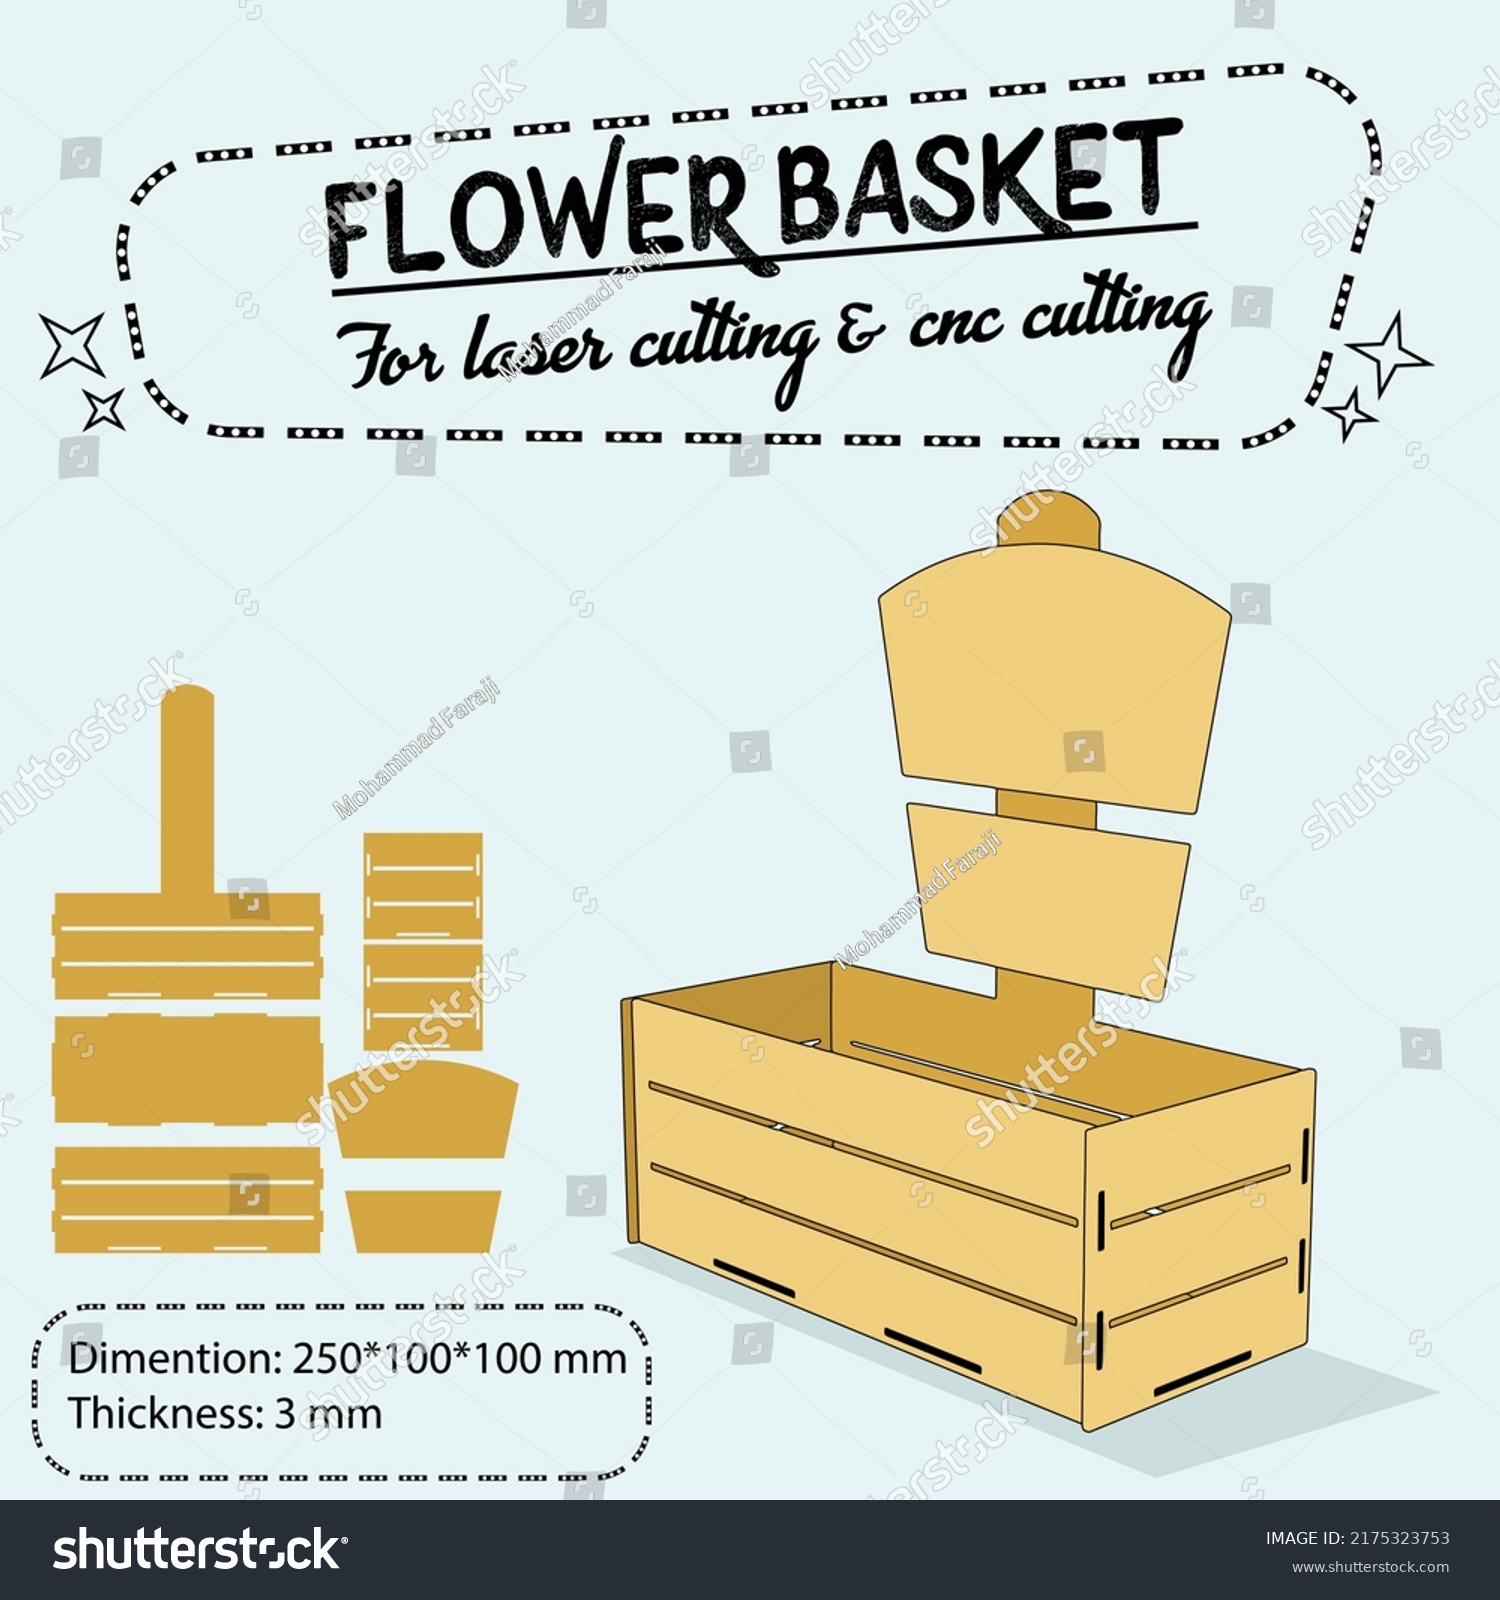 SVG of flower basket for laser cutting and cnc cutting svg